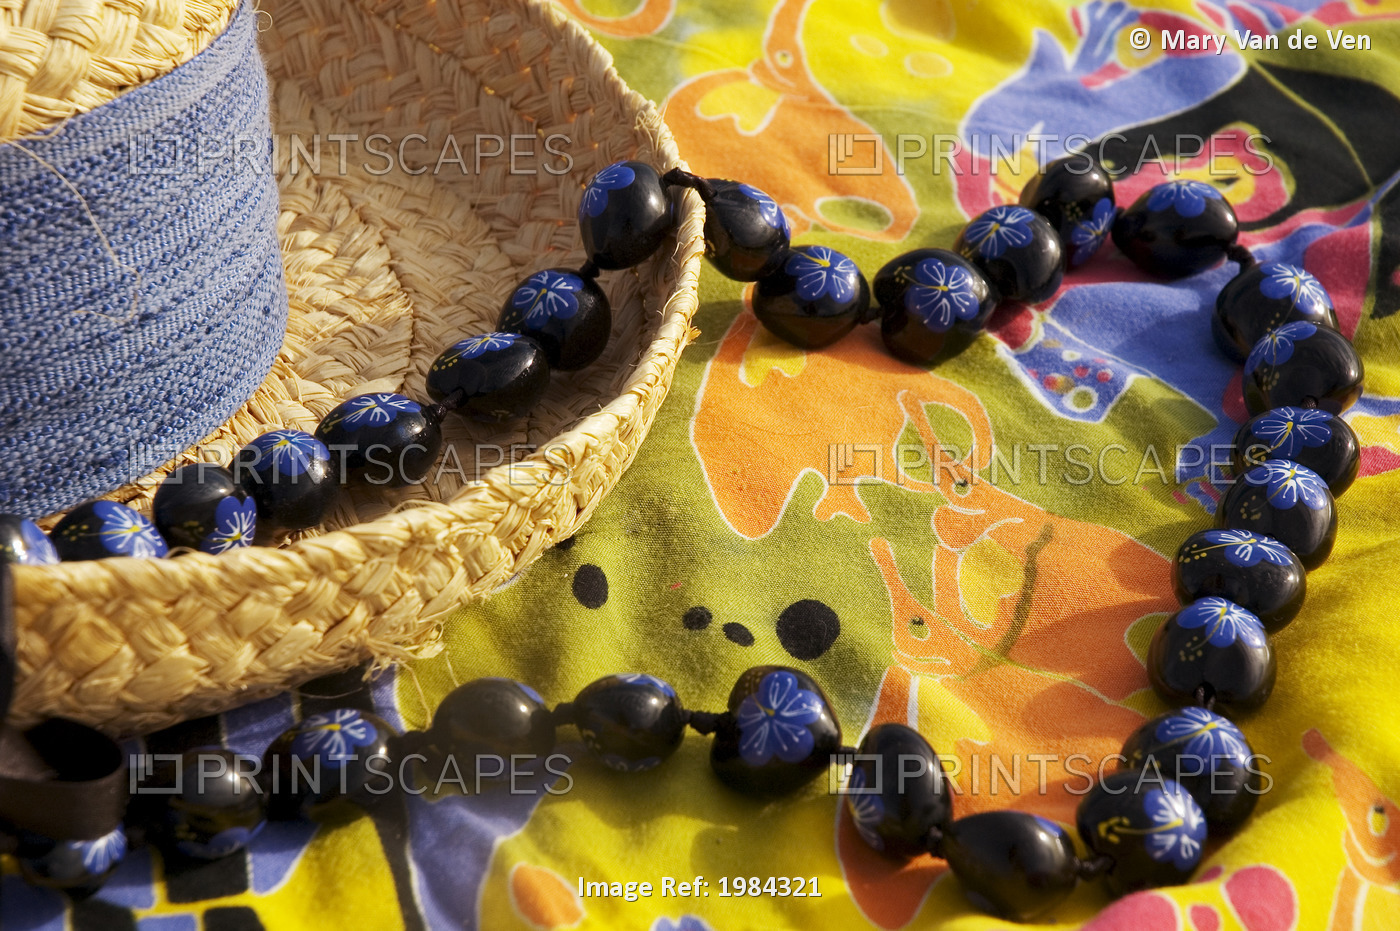 Straw Hat With Blue Band On Colorful Pareo (Sarong) With Hand Painted Kukui Nut ...